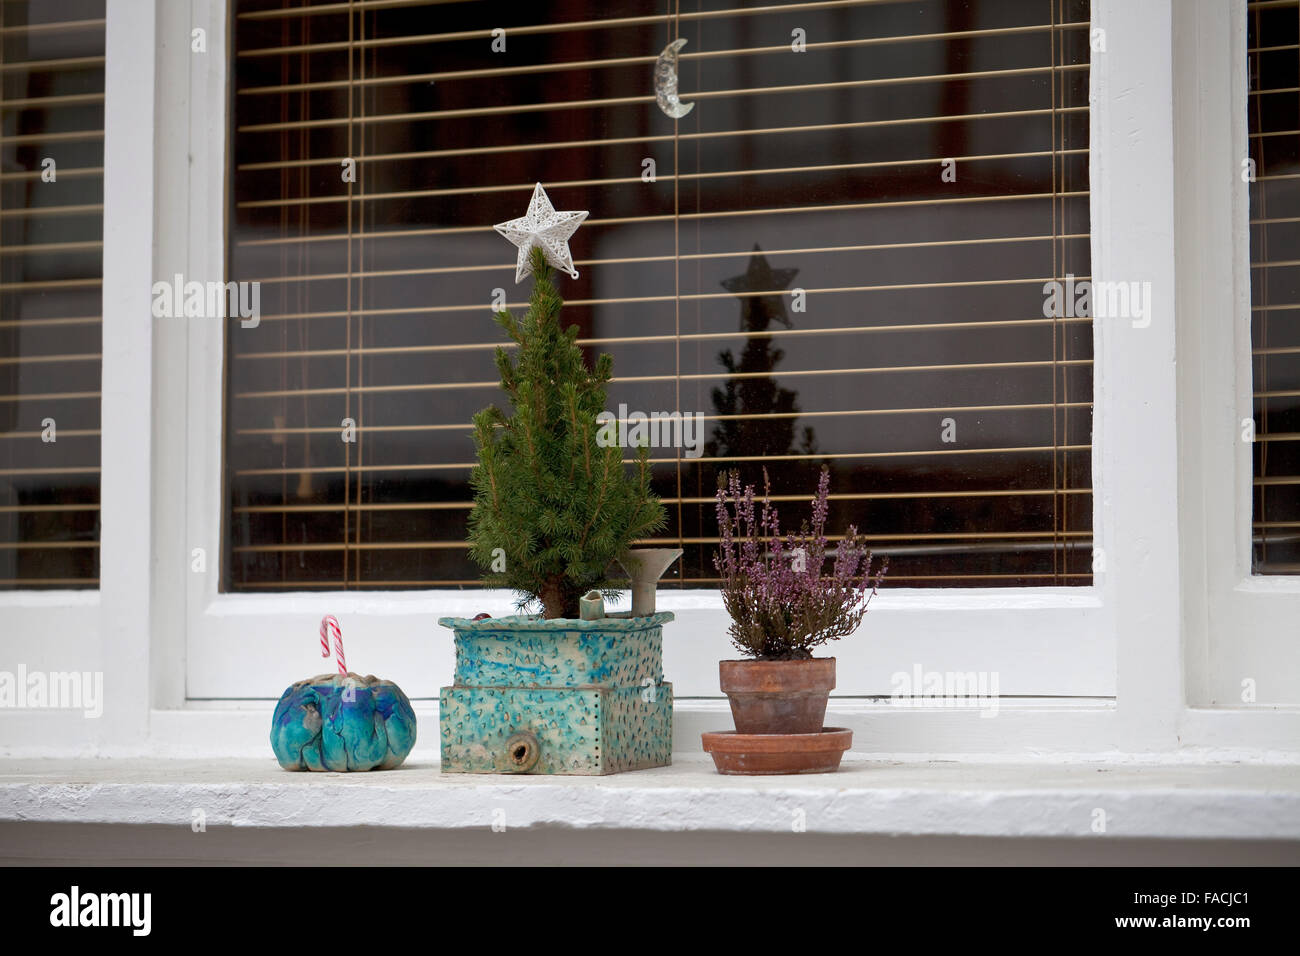 A Delicate Touch of Christmas. Not all displays over Christmas are excessive. Stock Photo